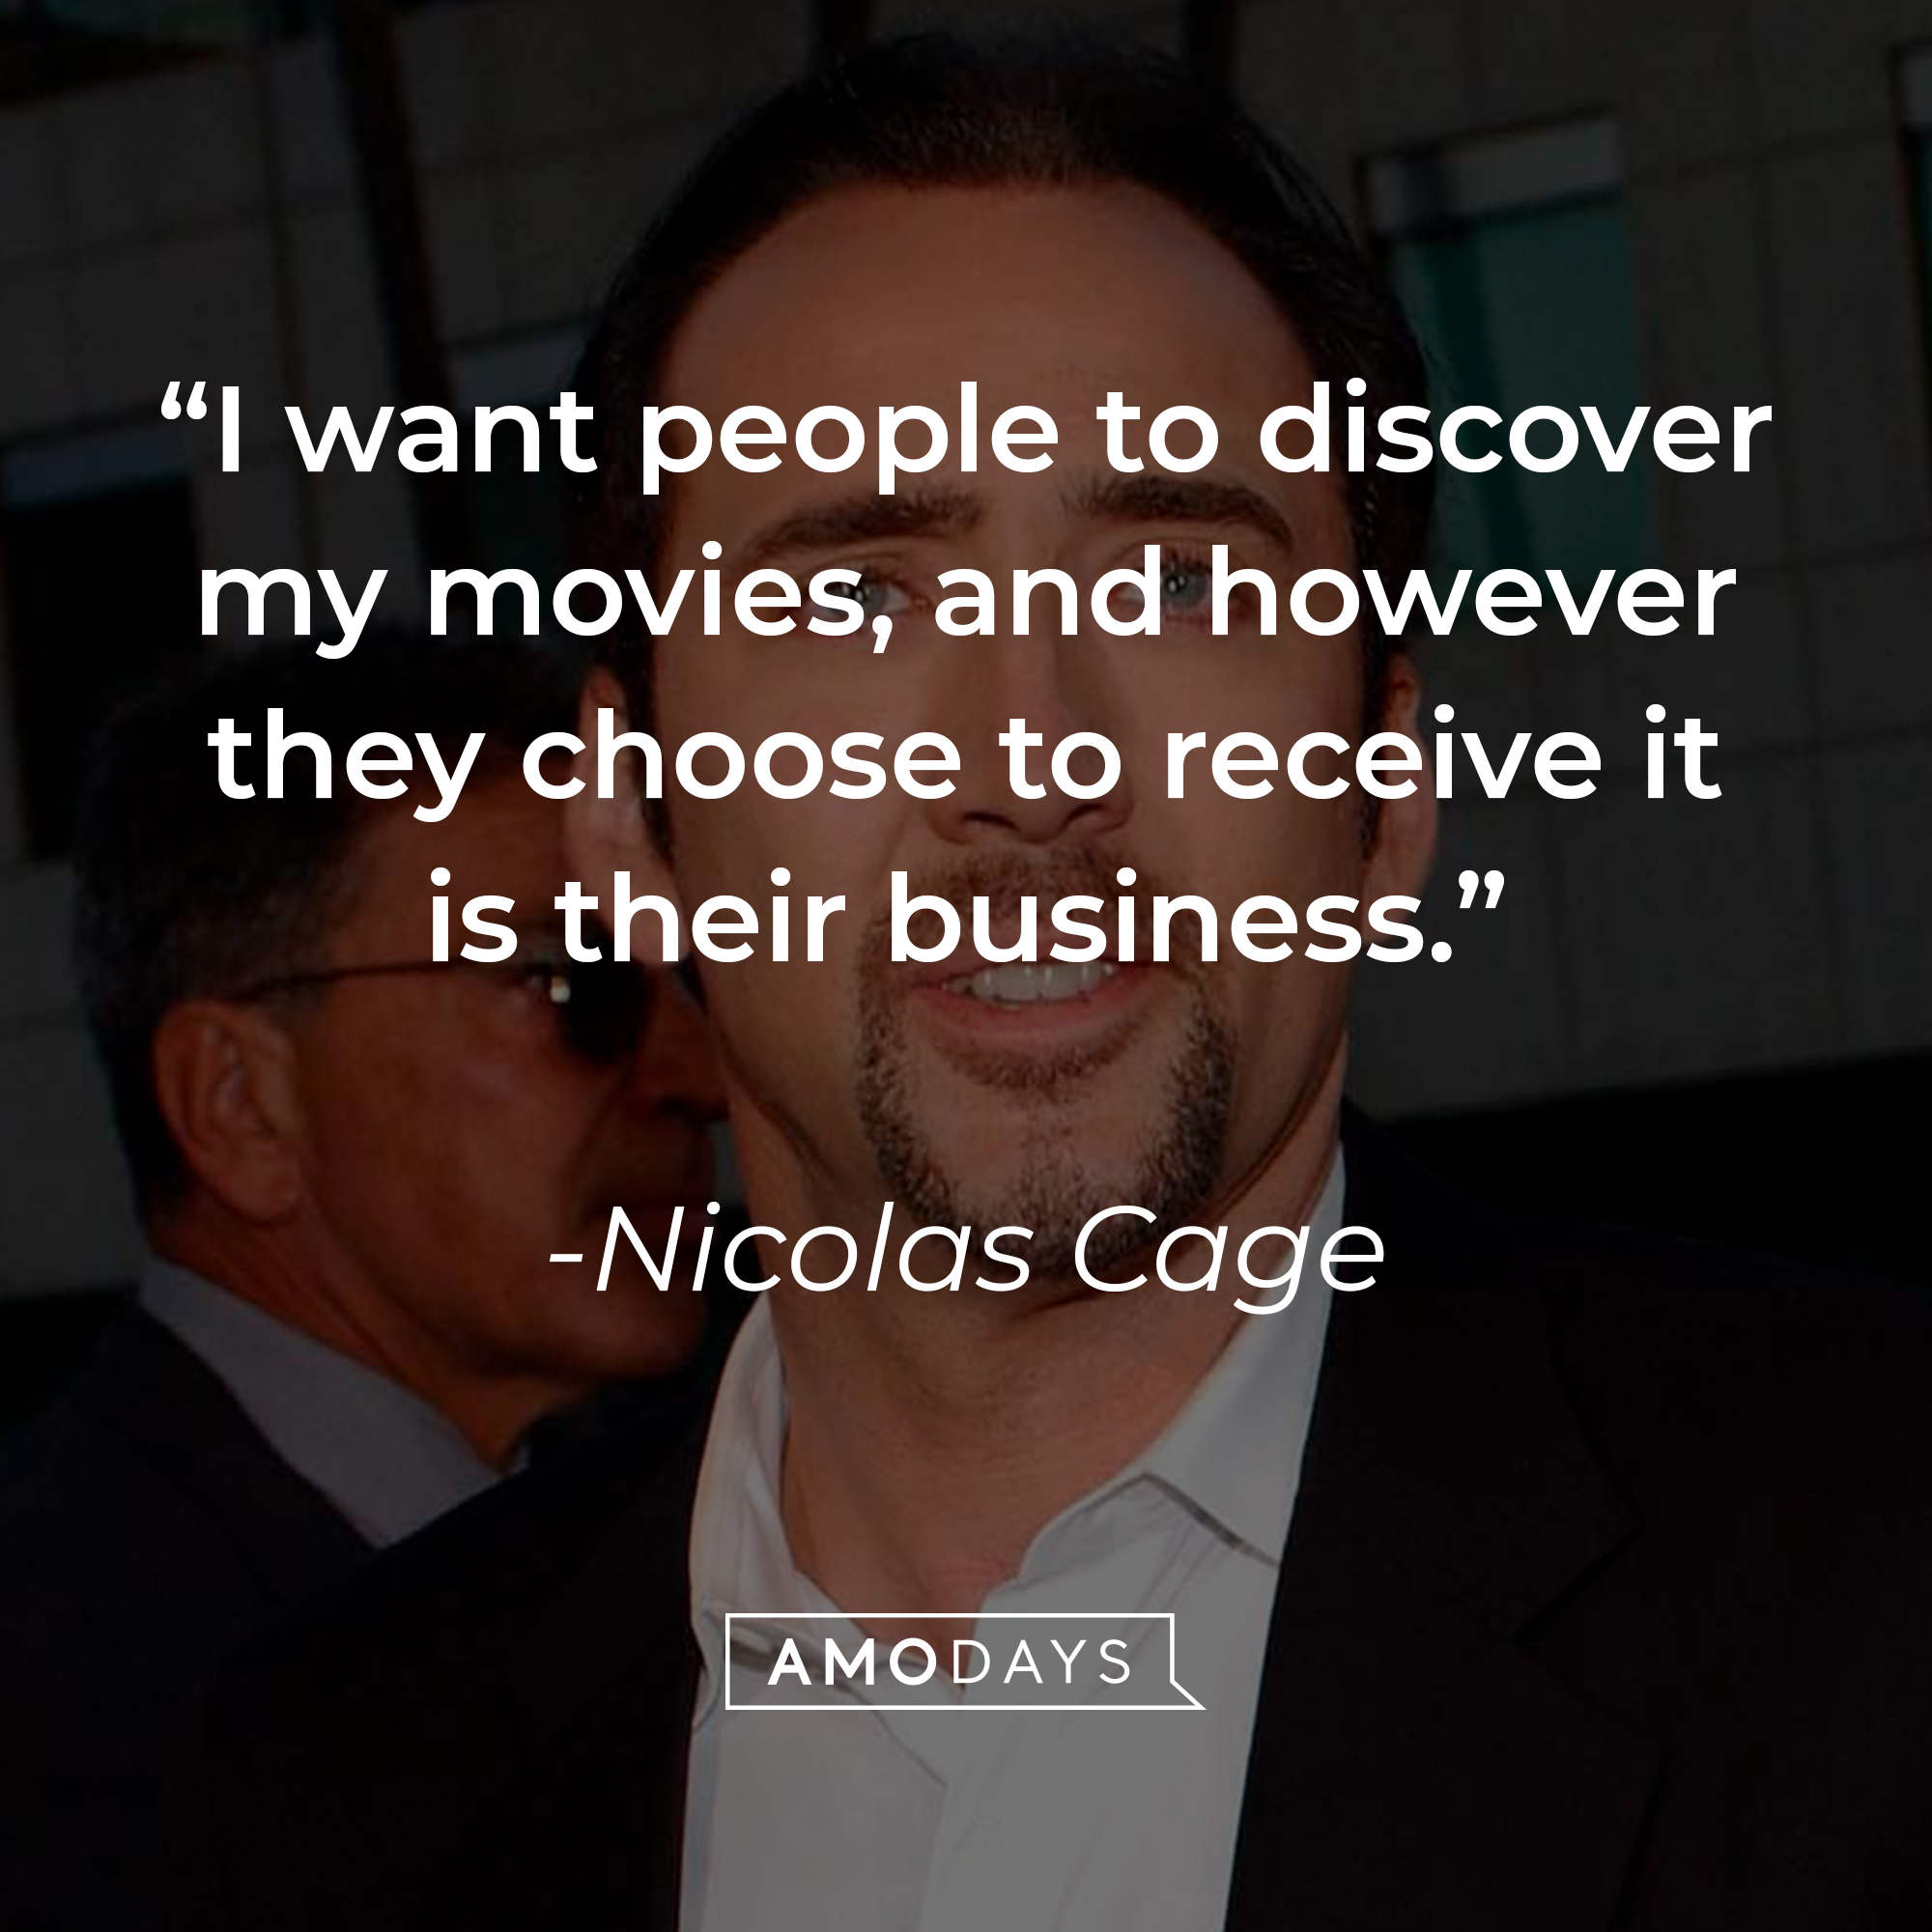 Nicolas Cage's quote: "I want people to discover my movies, and however they choose to receive it is their business." | Source: Getty Images